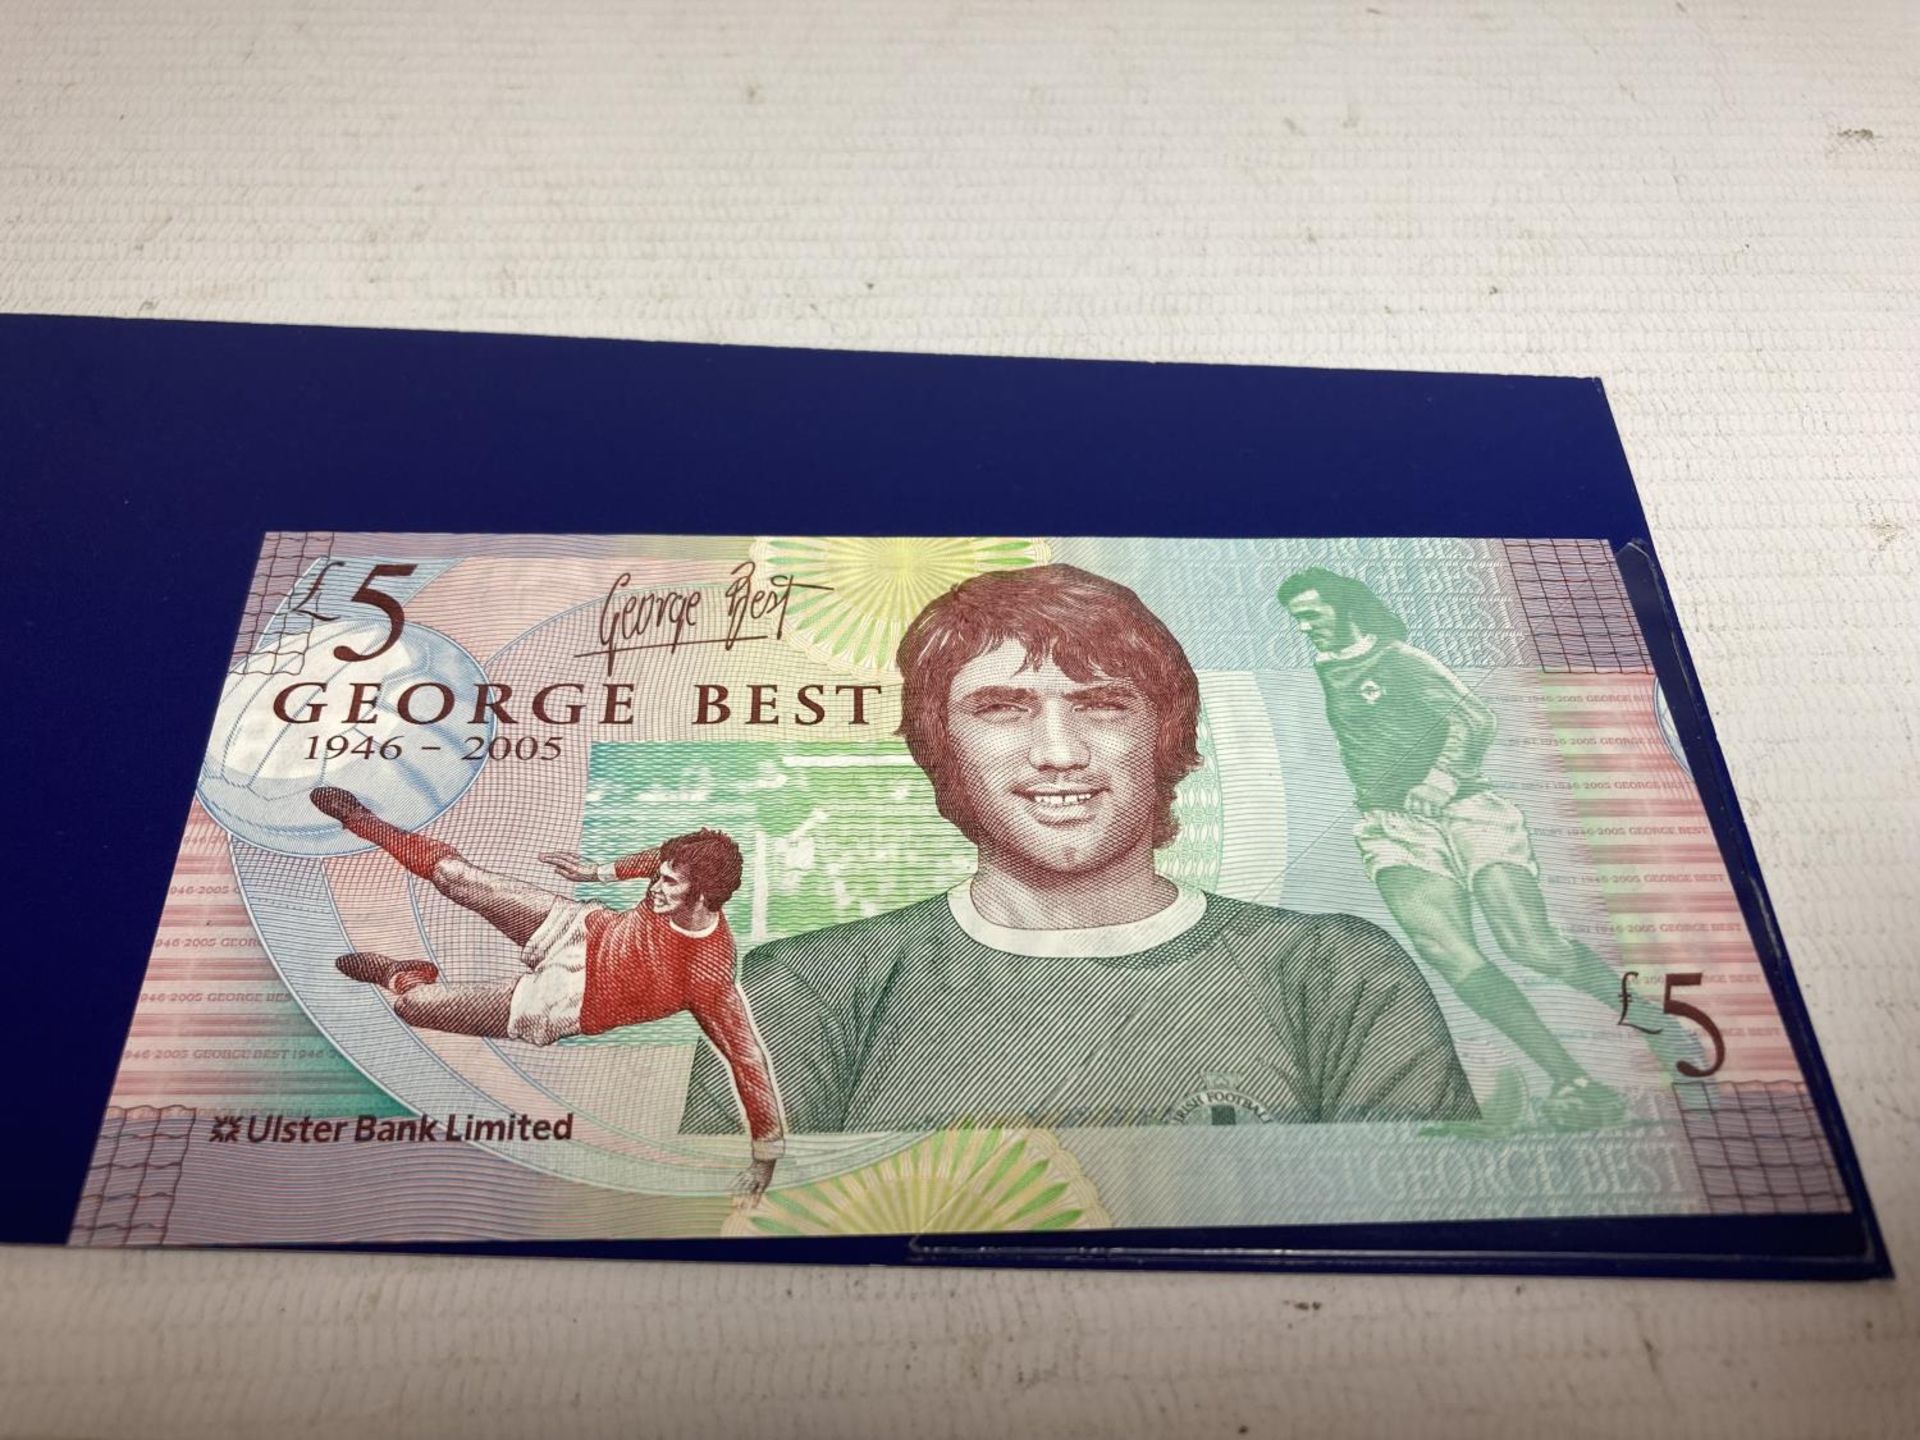 AN ULSTER BANK GEORGE BEST FIVE POUND NOTE IN A FOLDER AND A BANK OF SCOTLAND JACK NICKLAUS FIVE - Image 2 of 7